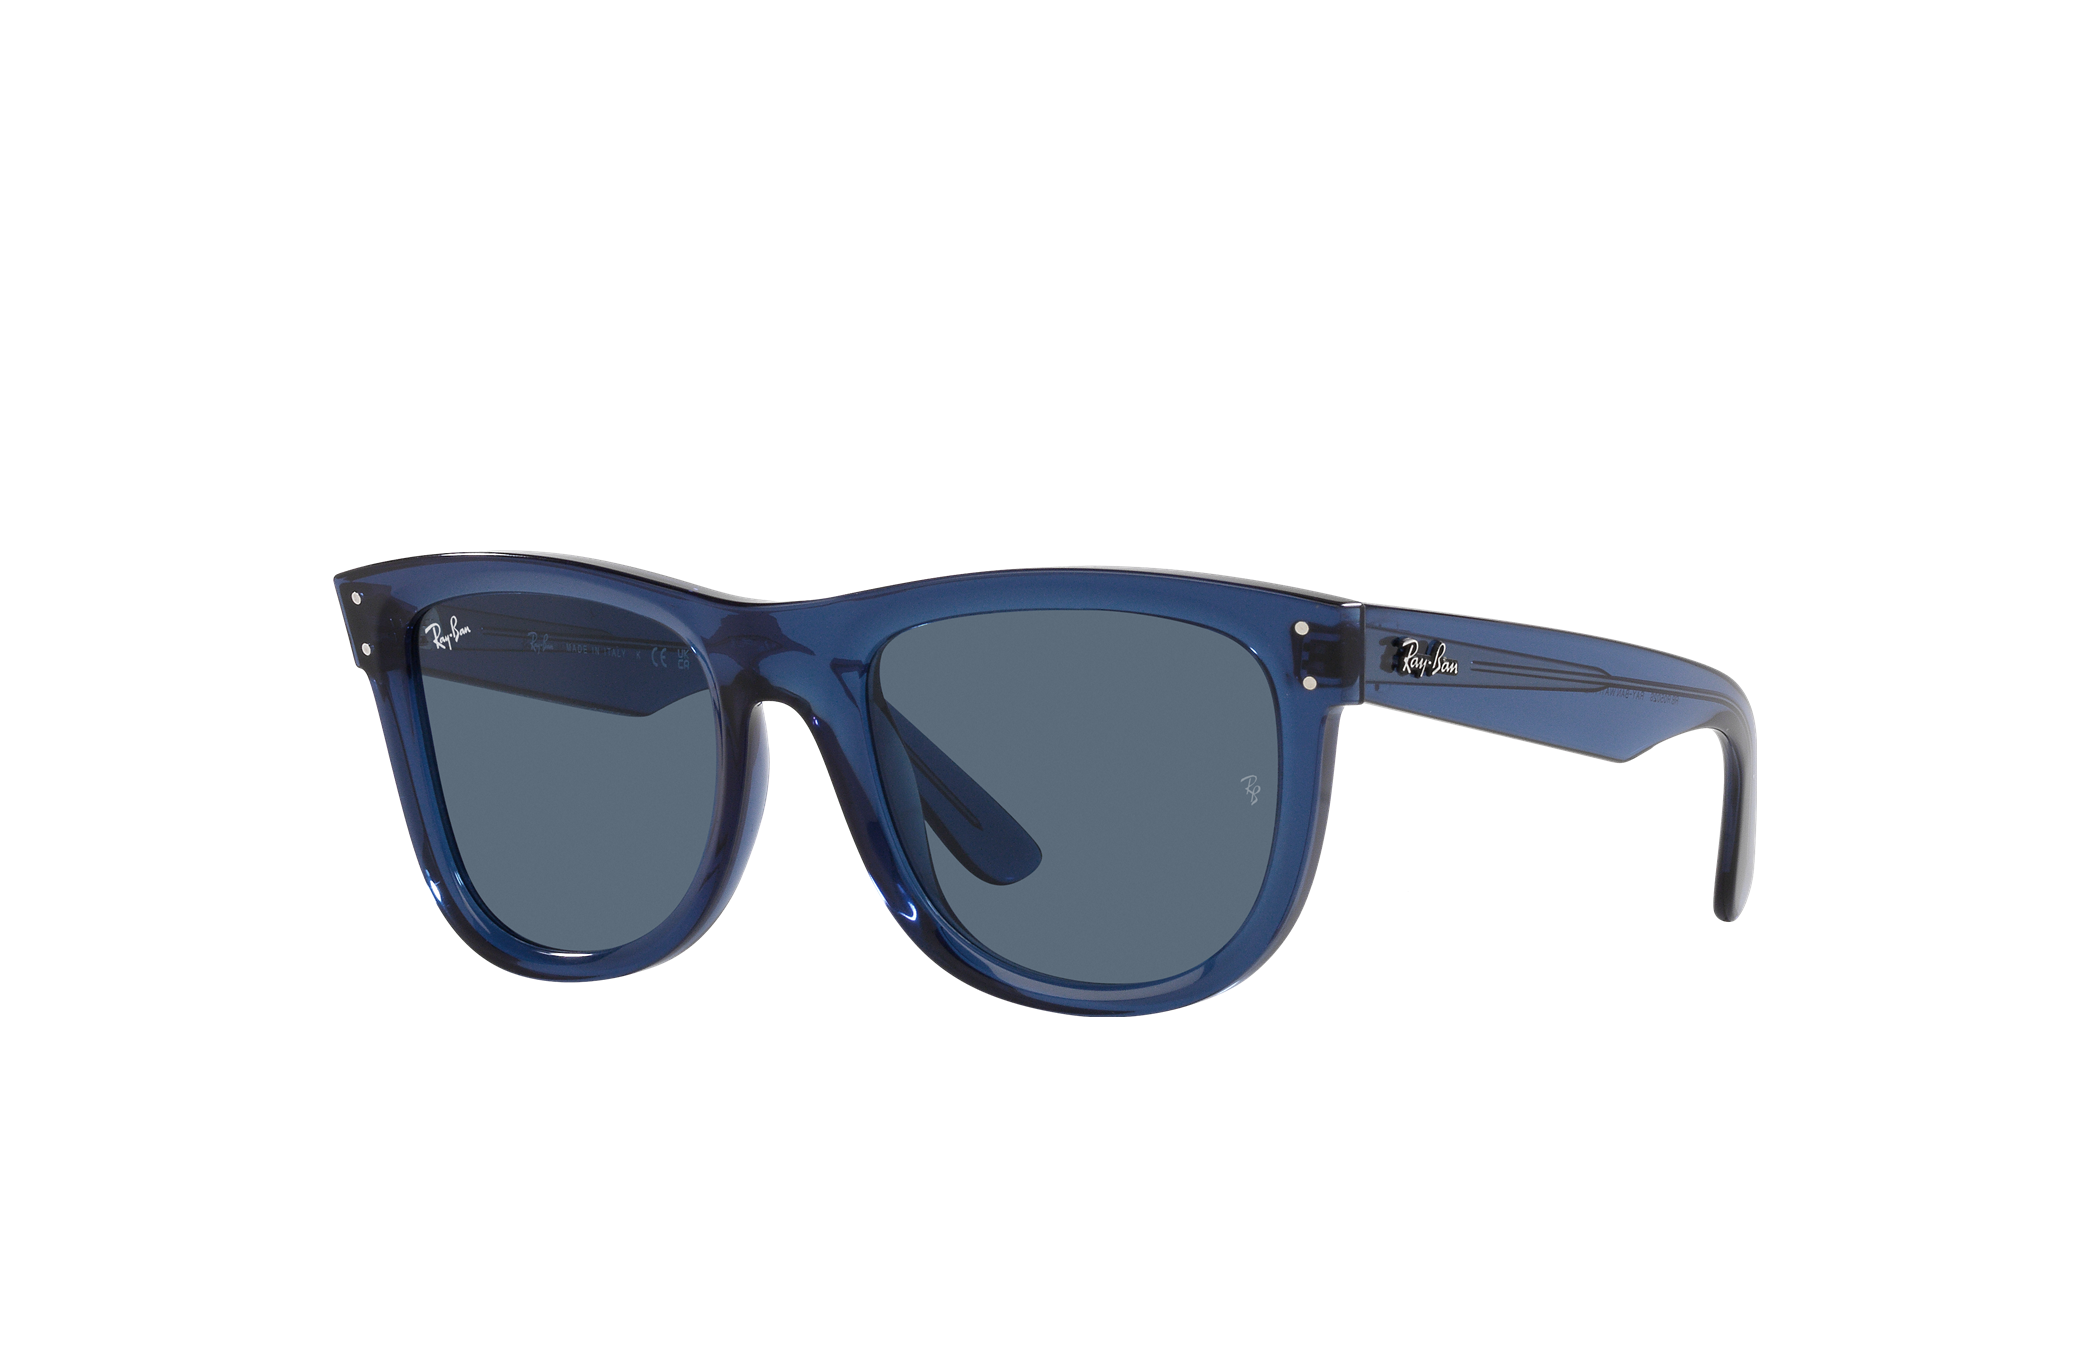 Wayfarer Reverse Sunglasses in Transparent Navy Blue and Dark Blue -  RBR0502S | Ray-Ban® US